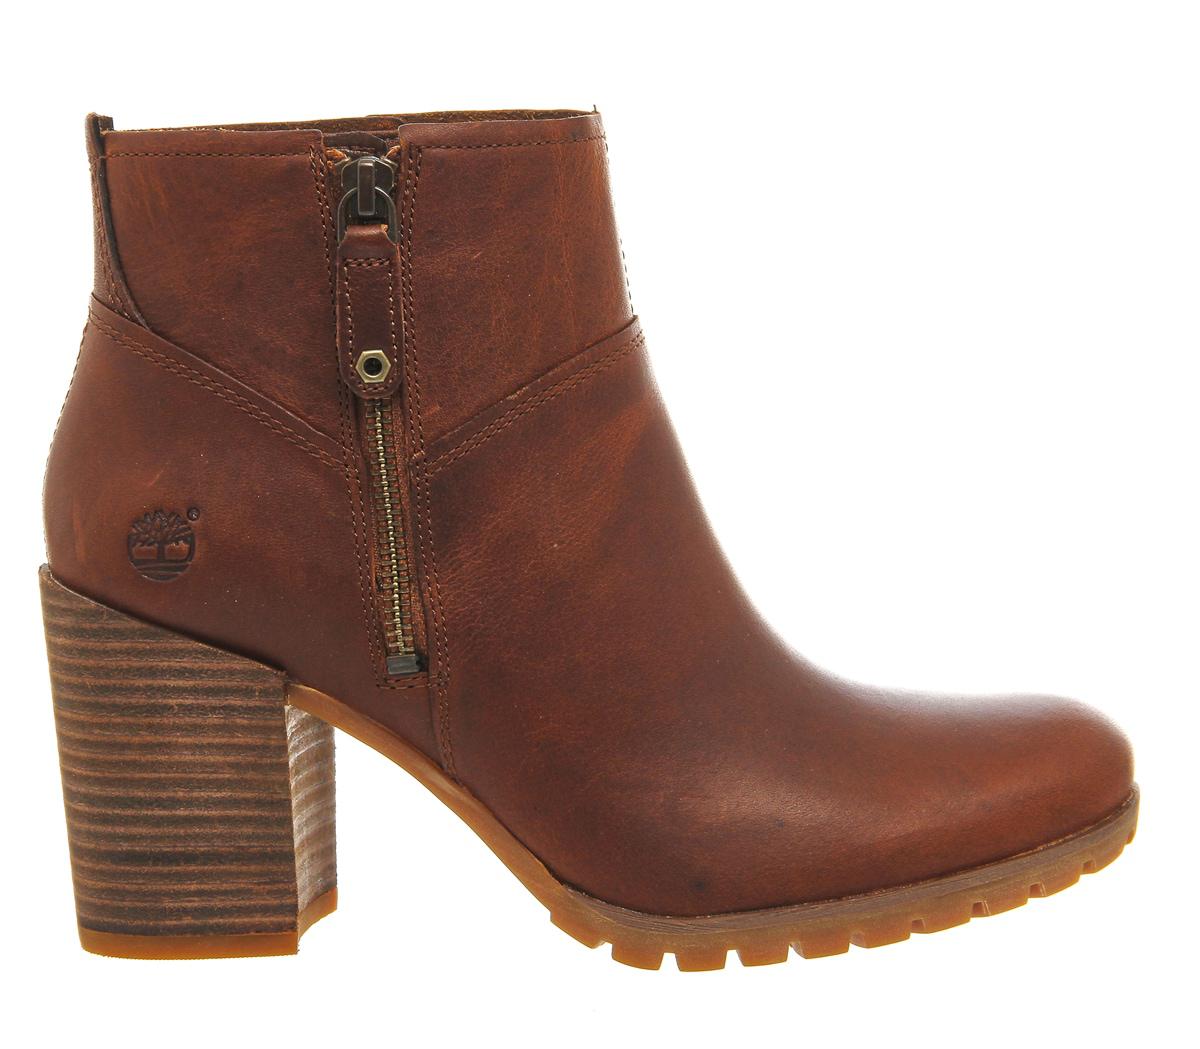 Timberland Swazey Zip Ankle Boots in Natural - Lyst